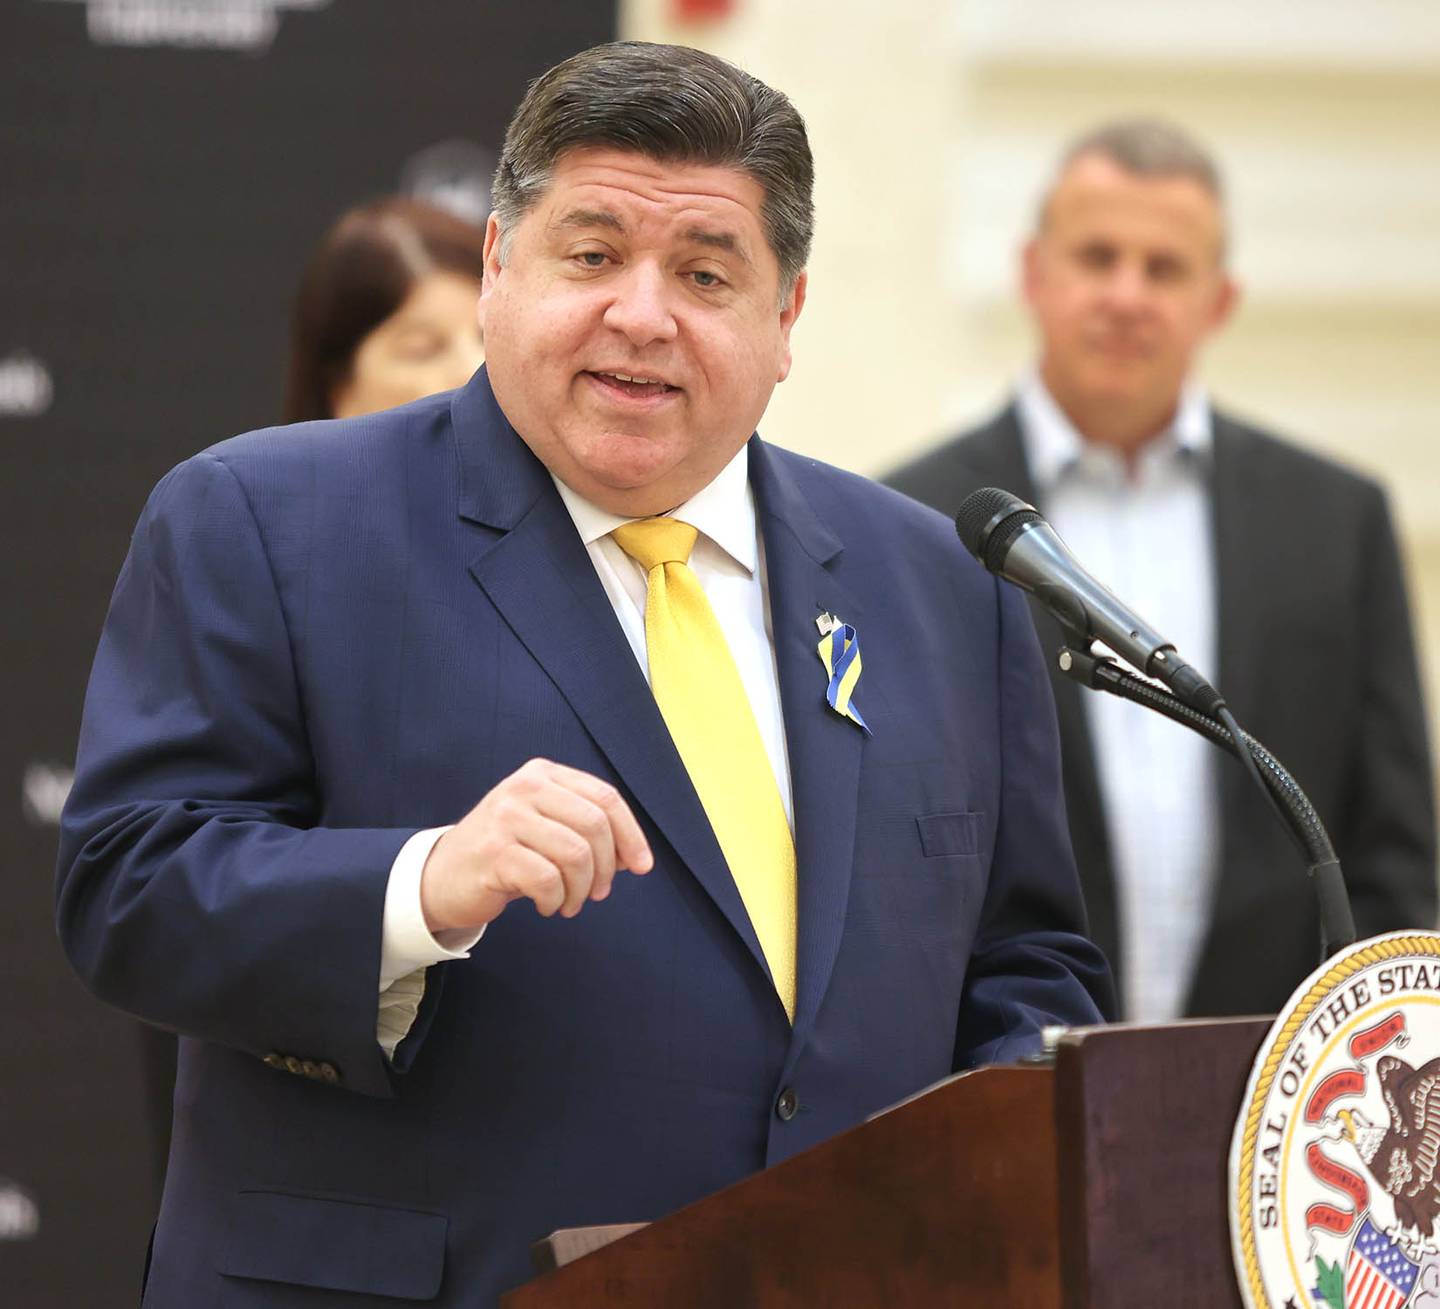 Illinois Gov. JB Pritzker speaks as DeKalb Mayor Cohen Barnes looks on Thursday, March 3, 2022, in the Barsema Alumni and Visitors Center at Northern Illinois University in DeKalb. Pritzker was on hand to talk about the importance of higher education and to tout some of the programs in Illinois that help make that education more accessible to all.